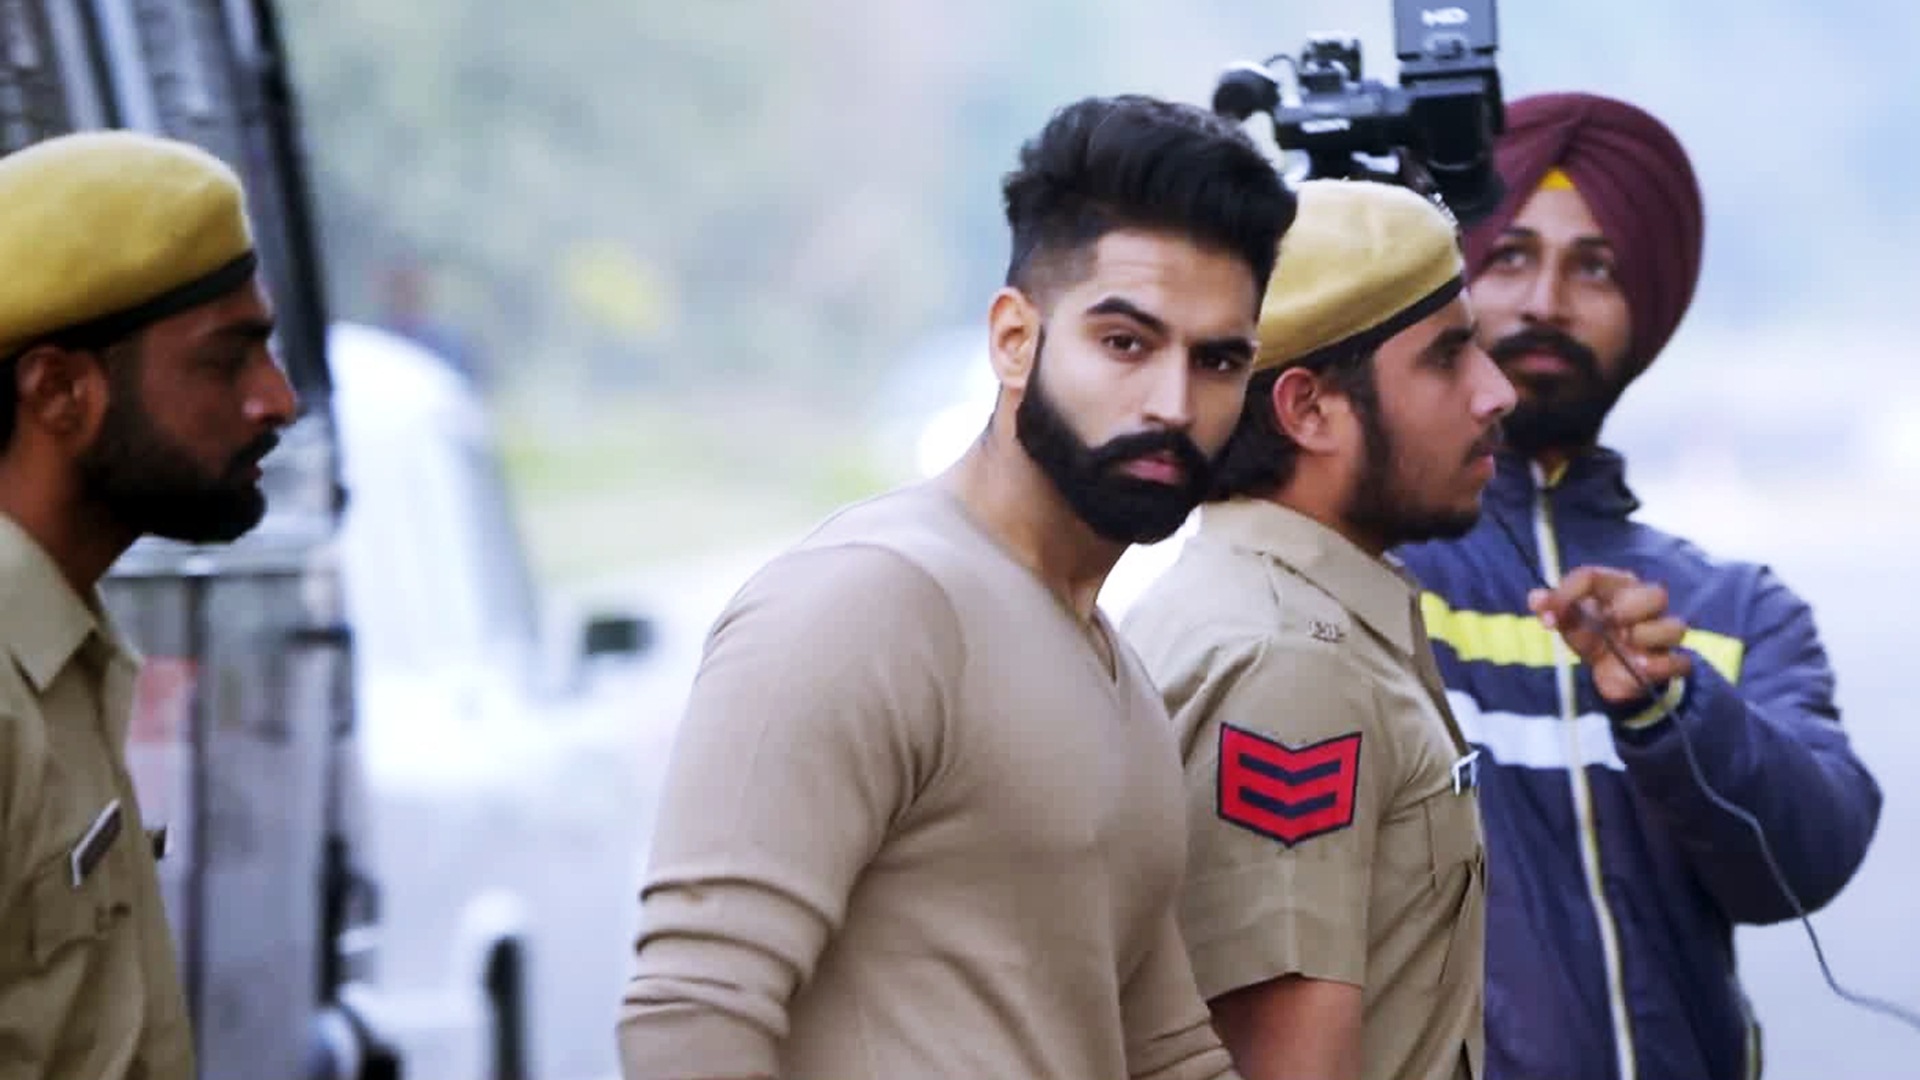 Parmish Verma dancing with his newborn daughter in his arms is the cutest  thing you will see today -Alldatmatterz